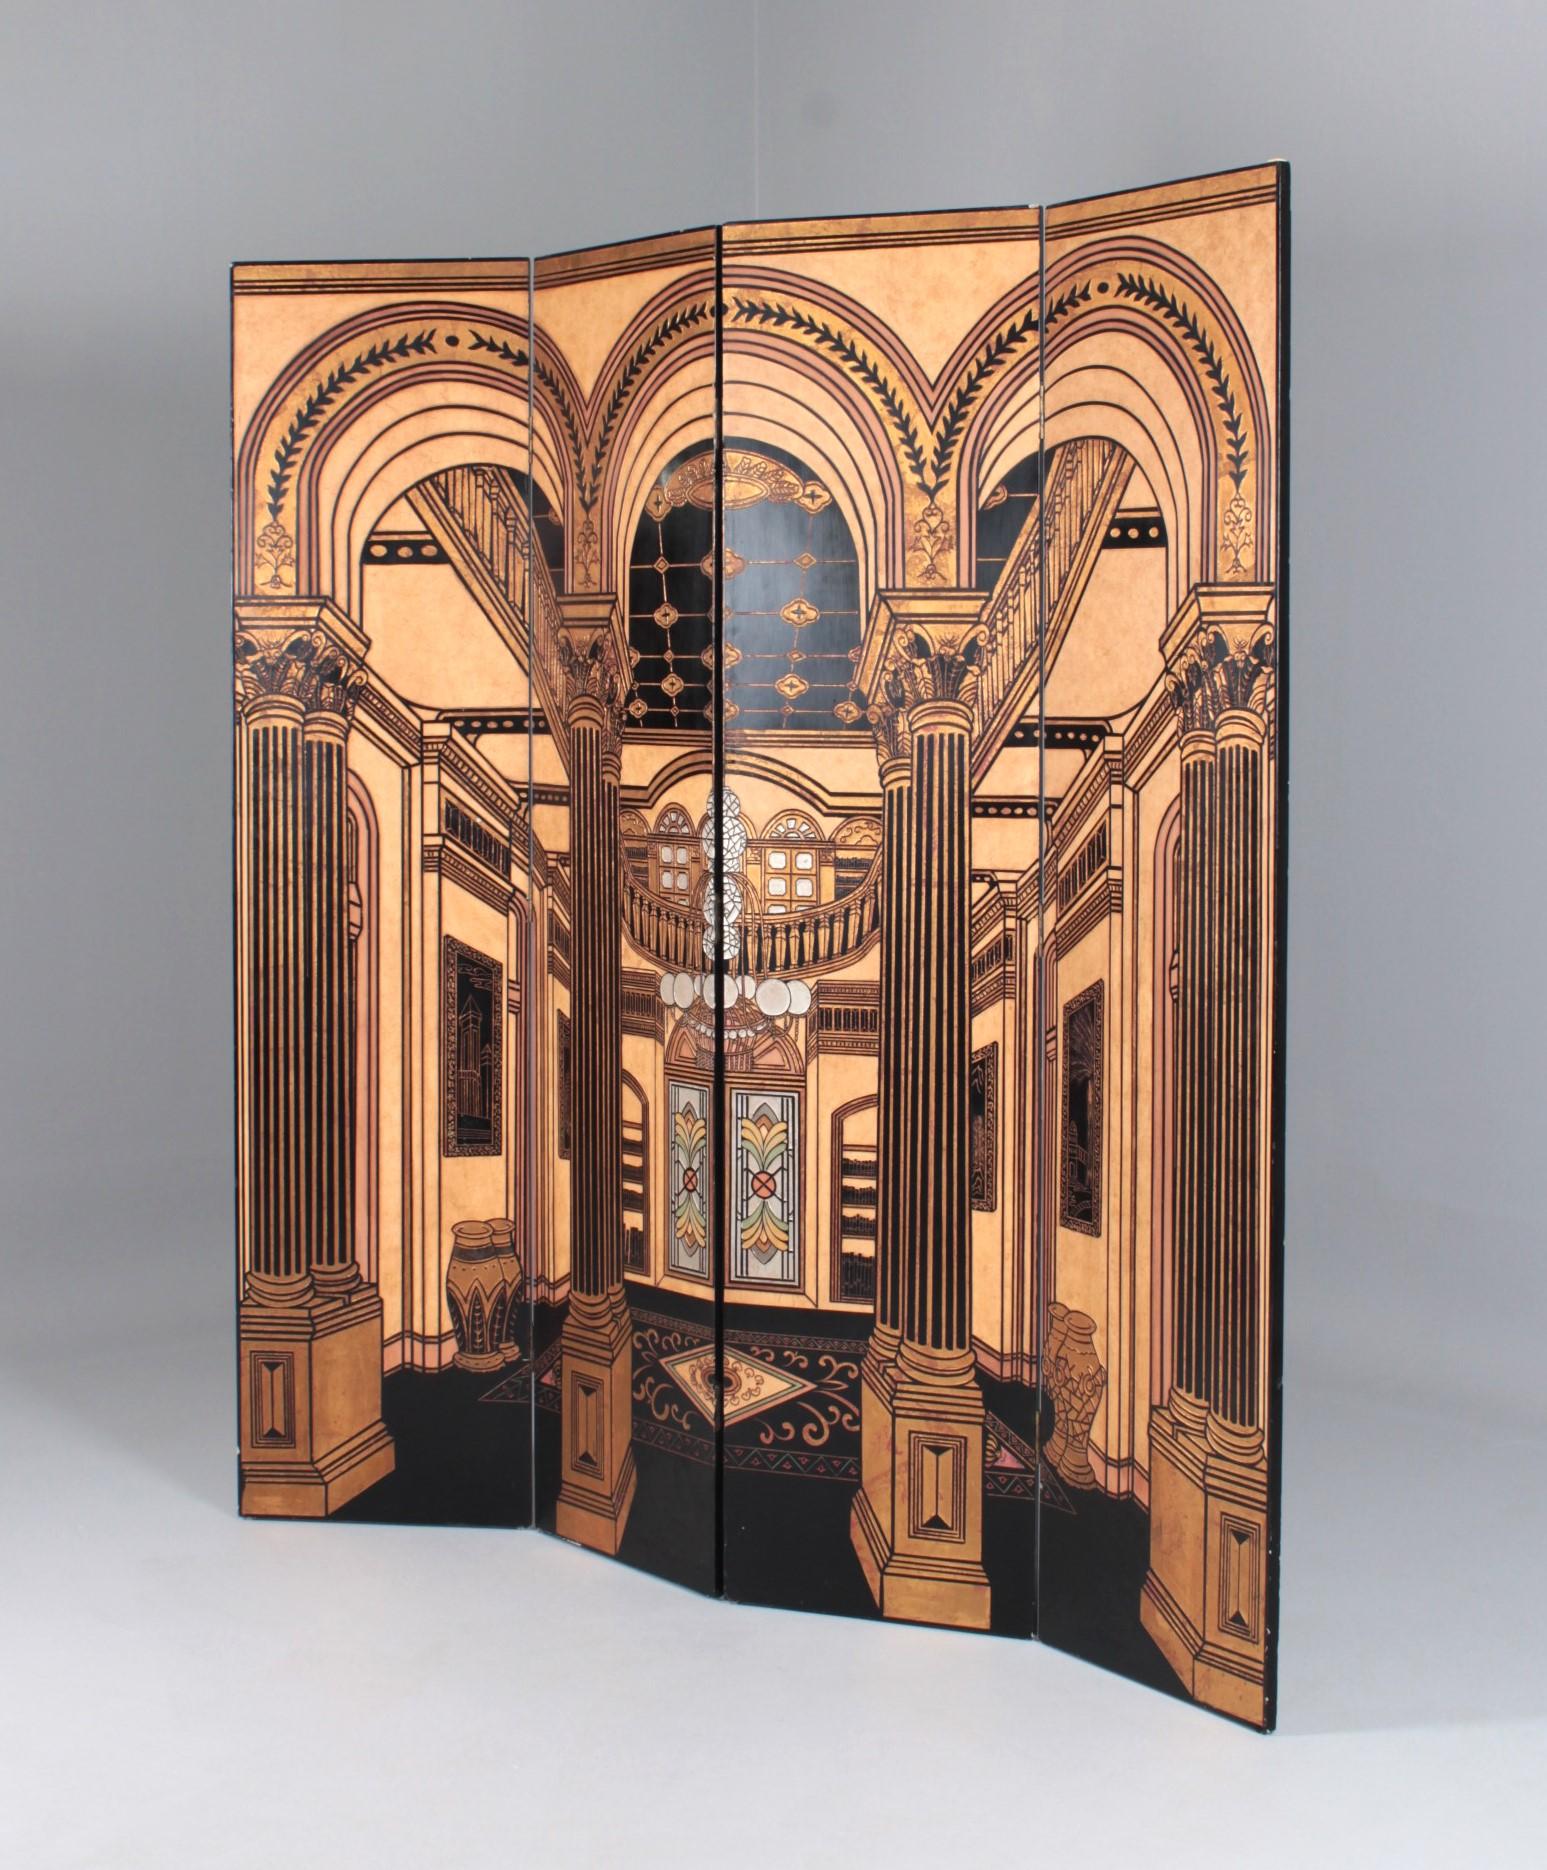 Large Art Deco Screen

France
Wood, stucco
Mid 20th c.

Dimensions: H x W x D: 214 x 204 x 2 cm

Description:
Impressive screen with an Art Deco interior scene.

The room divider consists of four elements, each 51 cm wide. The panels are made of